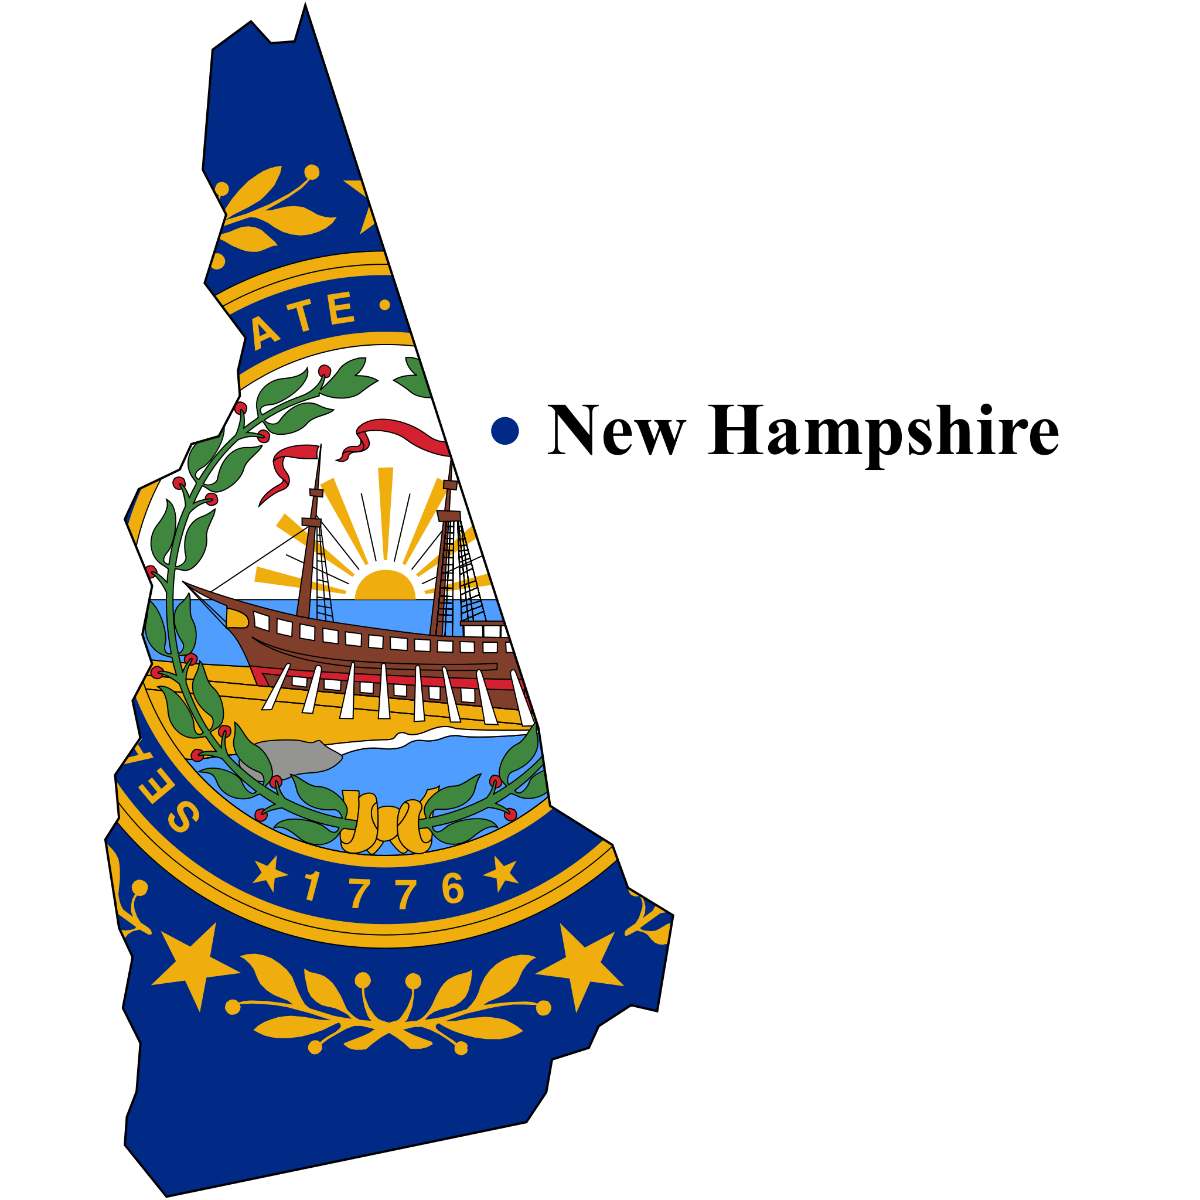 New Hampshire State map cutout with New Hampshire flag superimposed